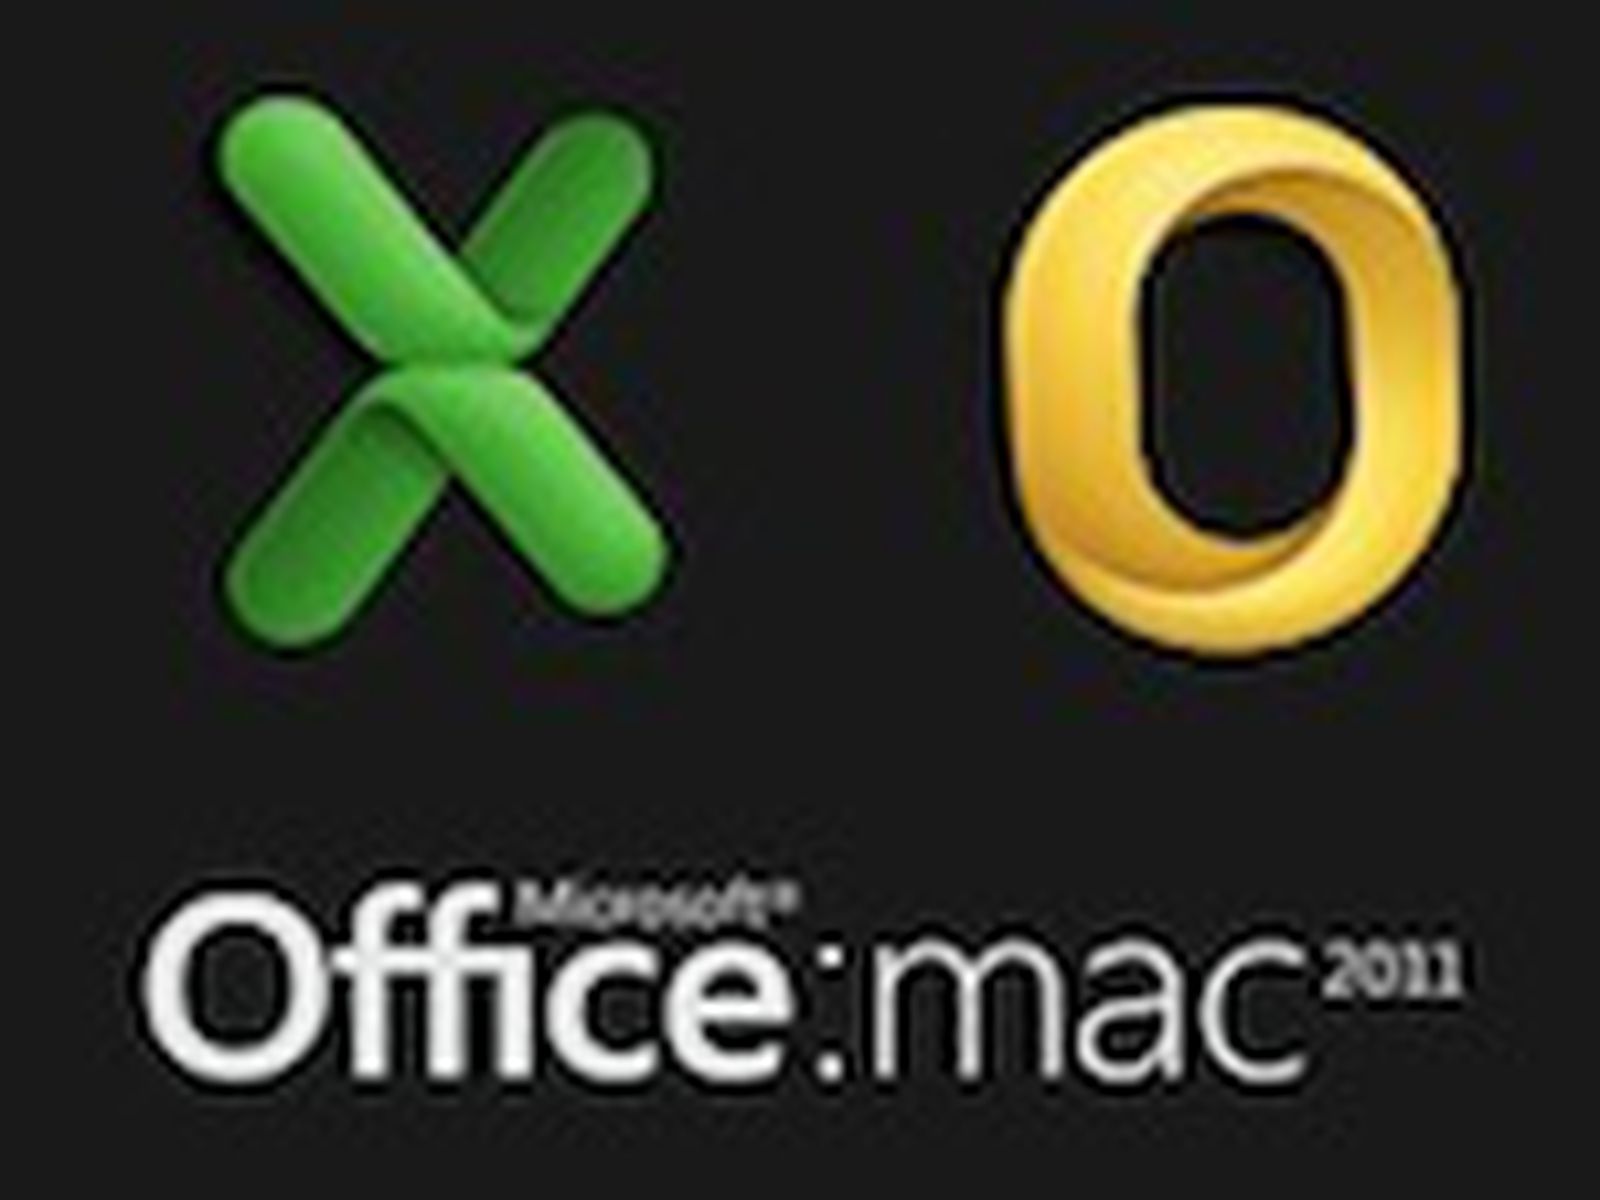 import contacts and email from entrouge 2004 for mac to outlook 2015 for mac